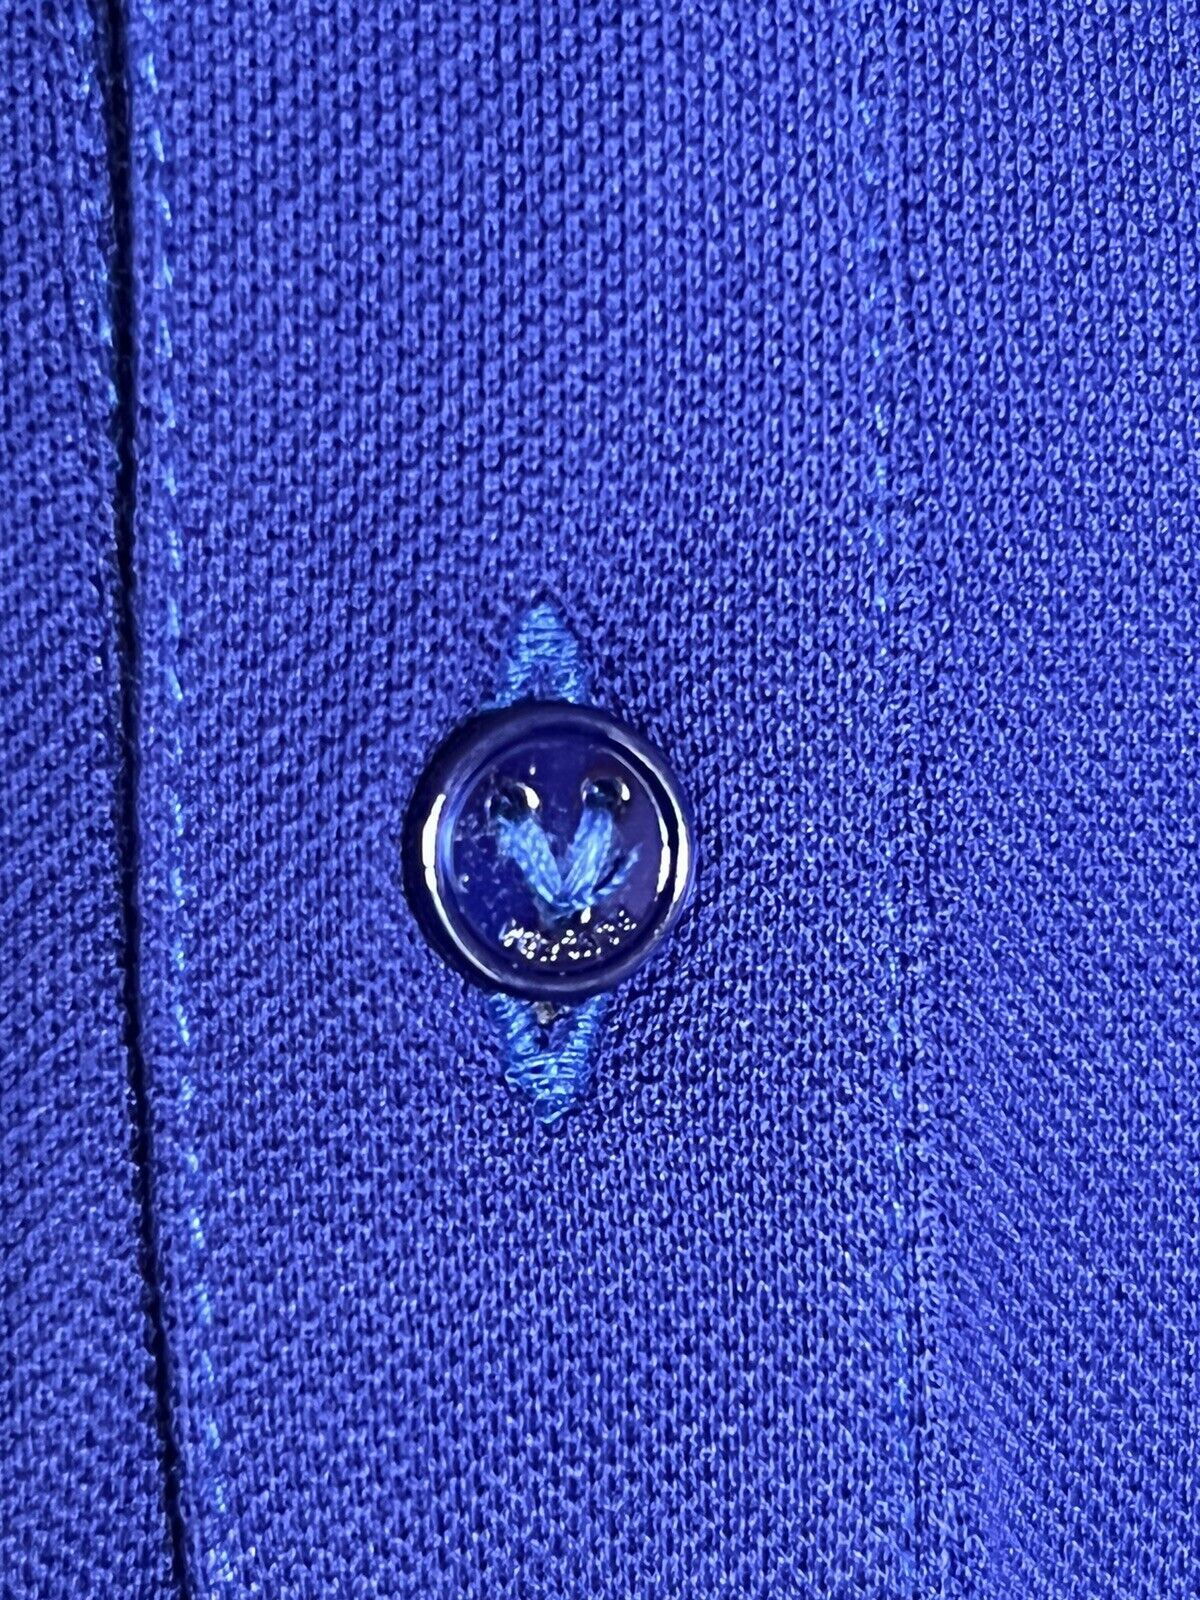 NWT $425 Versace Medusa Blue Tailor Fit Cotton Polo Shirt M A87427 Made in Italy